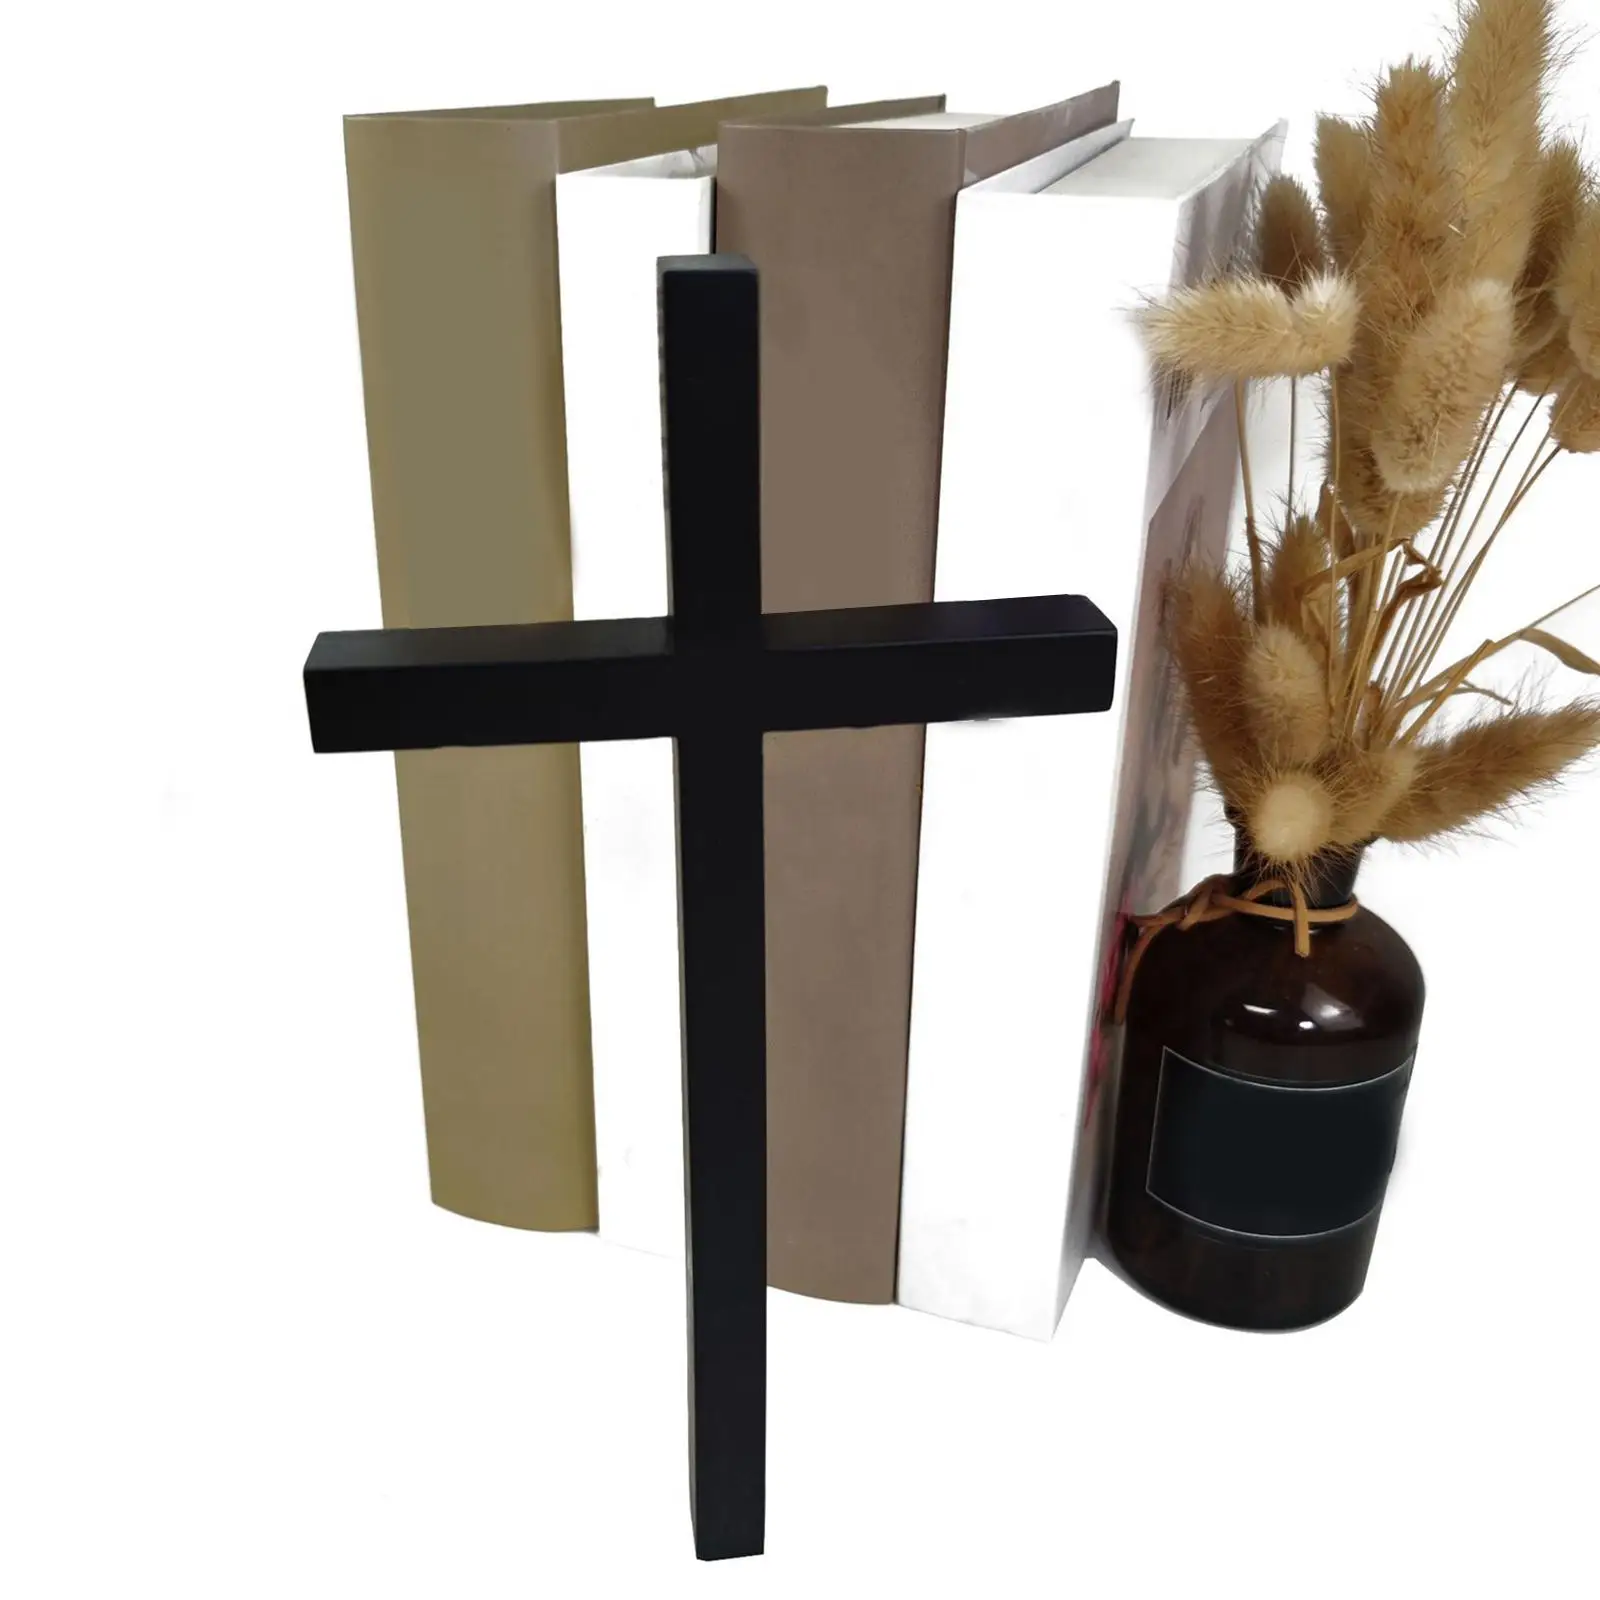 Church Cross Jesus Worship Collectible Christianity Religious Wall Hanging Crucifix Sculpture Decoration Easter Home Living Room